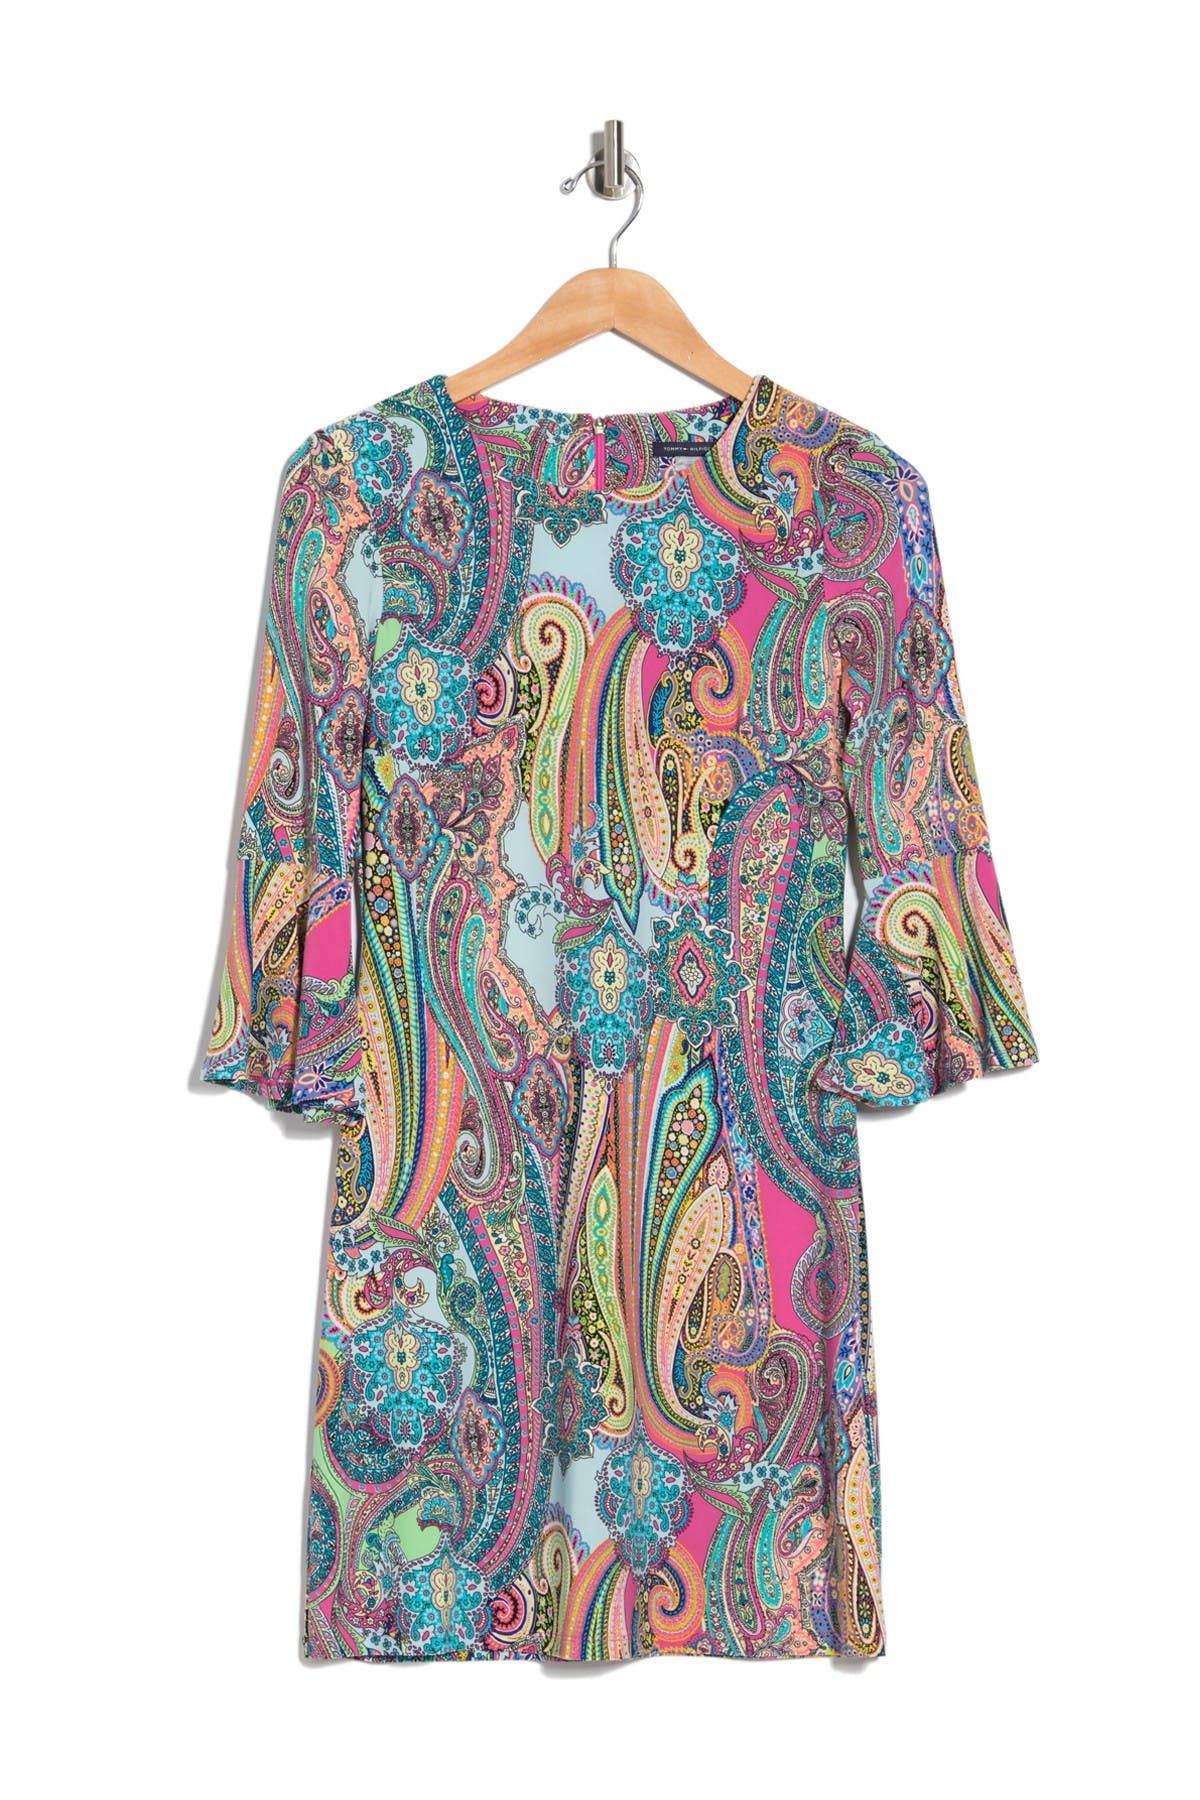 tommy hilfiger paisley bell sleeve dress